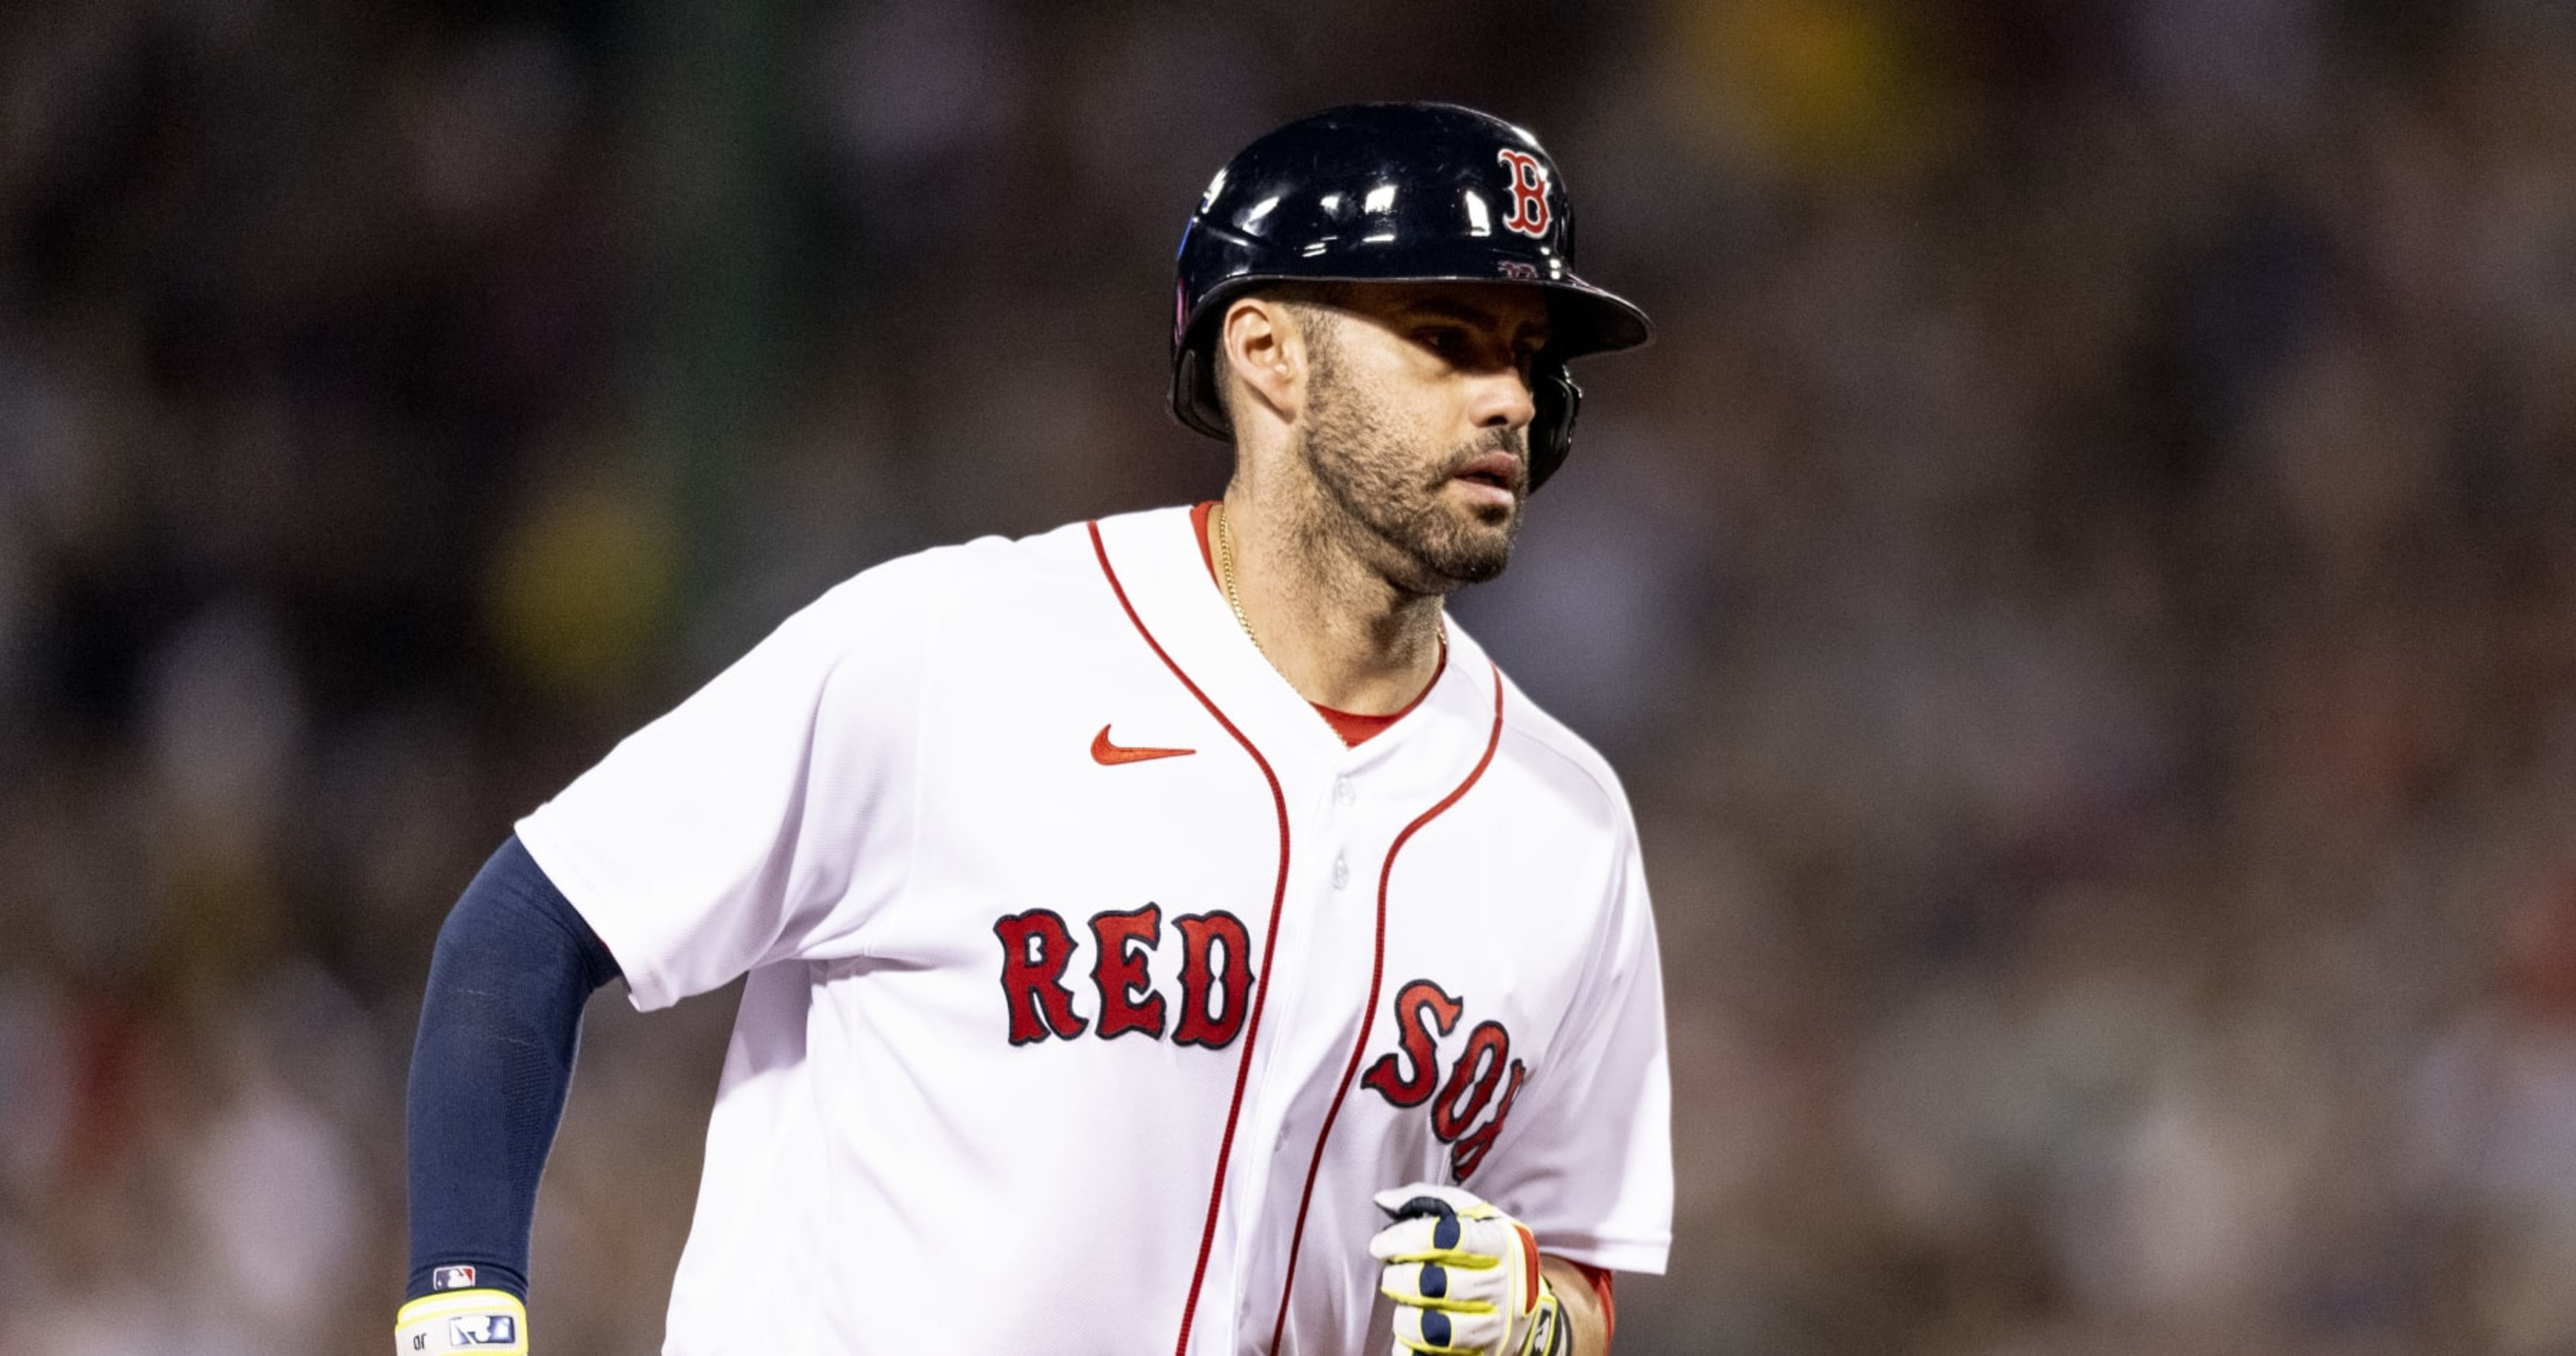 MLB trade rumors: J.D. Martinez signs with Boston Red Sox - Bless